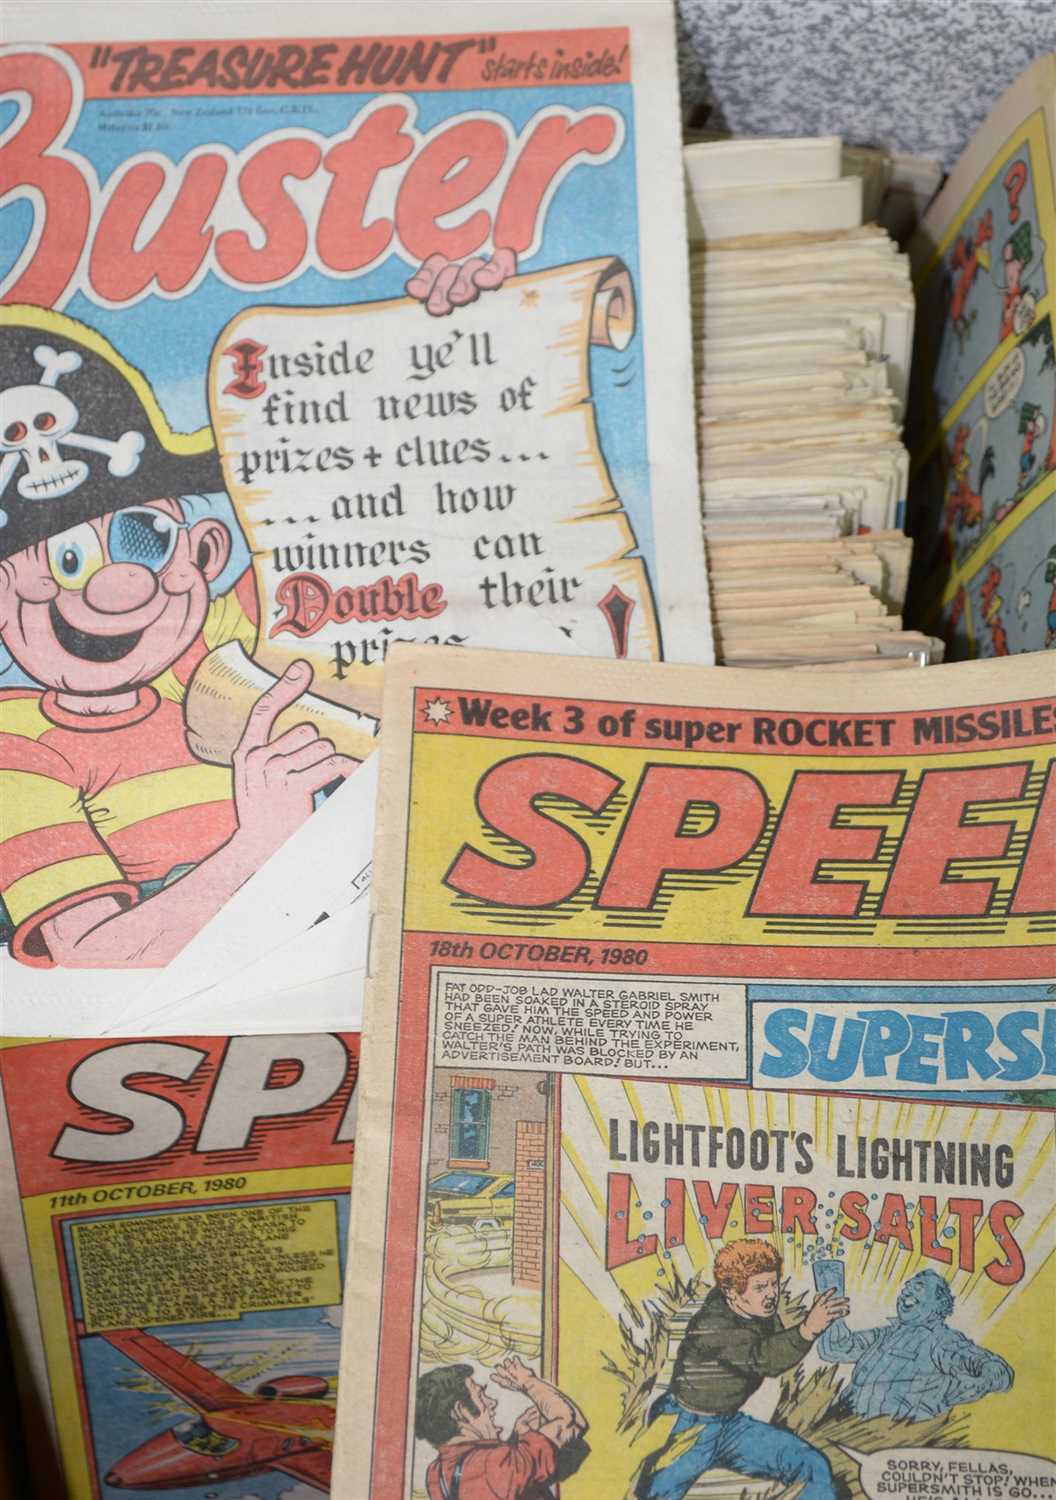 Lot 1186 - A collection of Buster and Speed comics